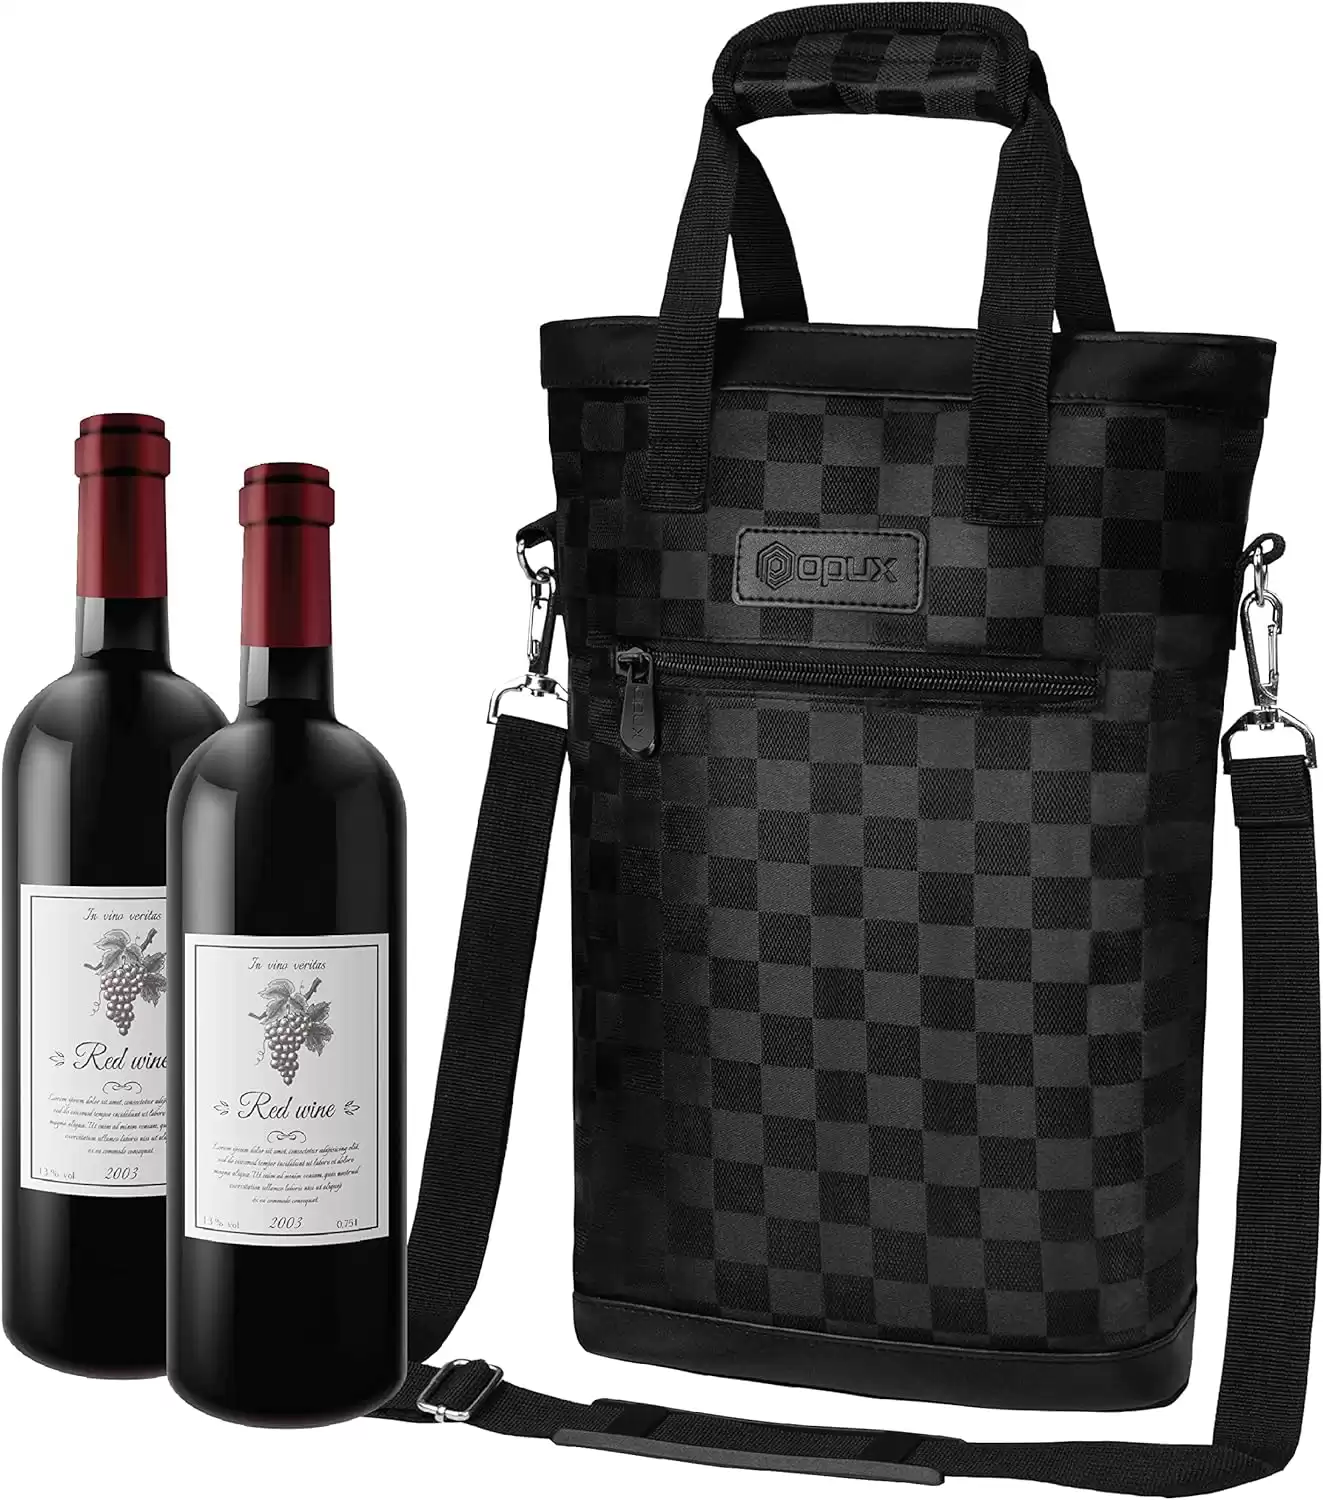 OPUX Two Bottle Wine Bag Carrier & Tote